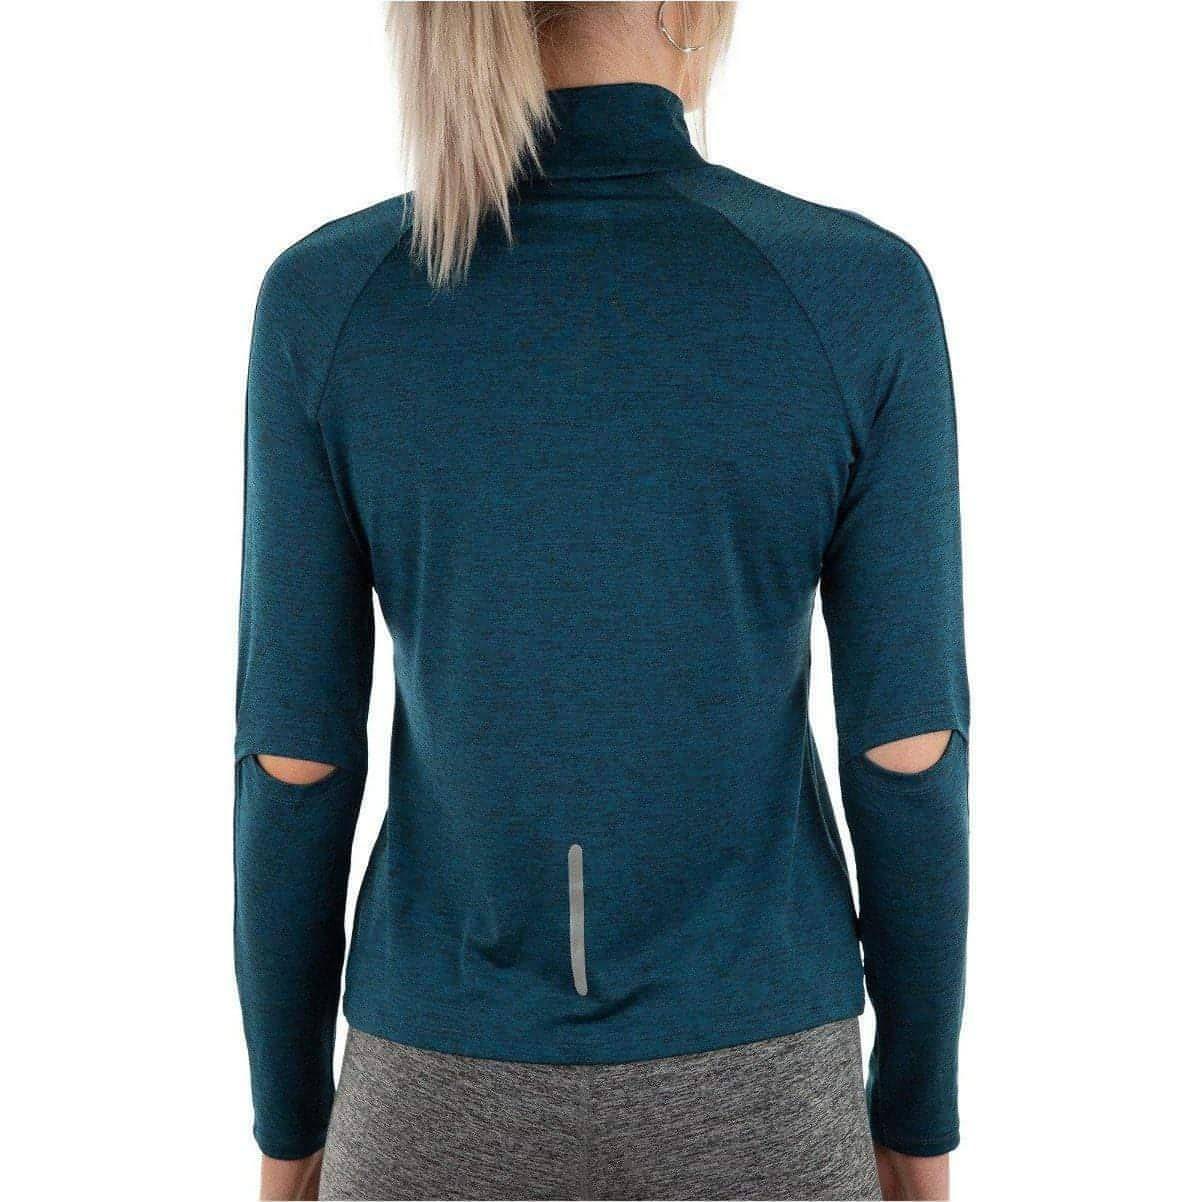 More Mile Train To Run Womens Long Sleeve Funnel Neck Running Top - Blue - Start Fitness